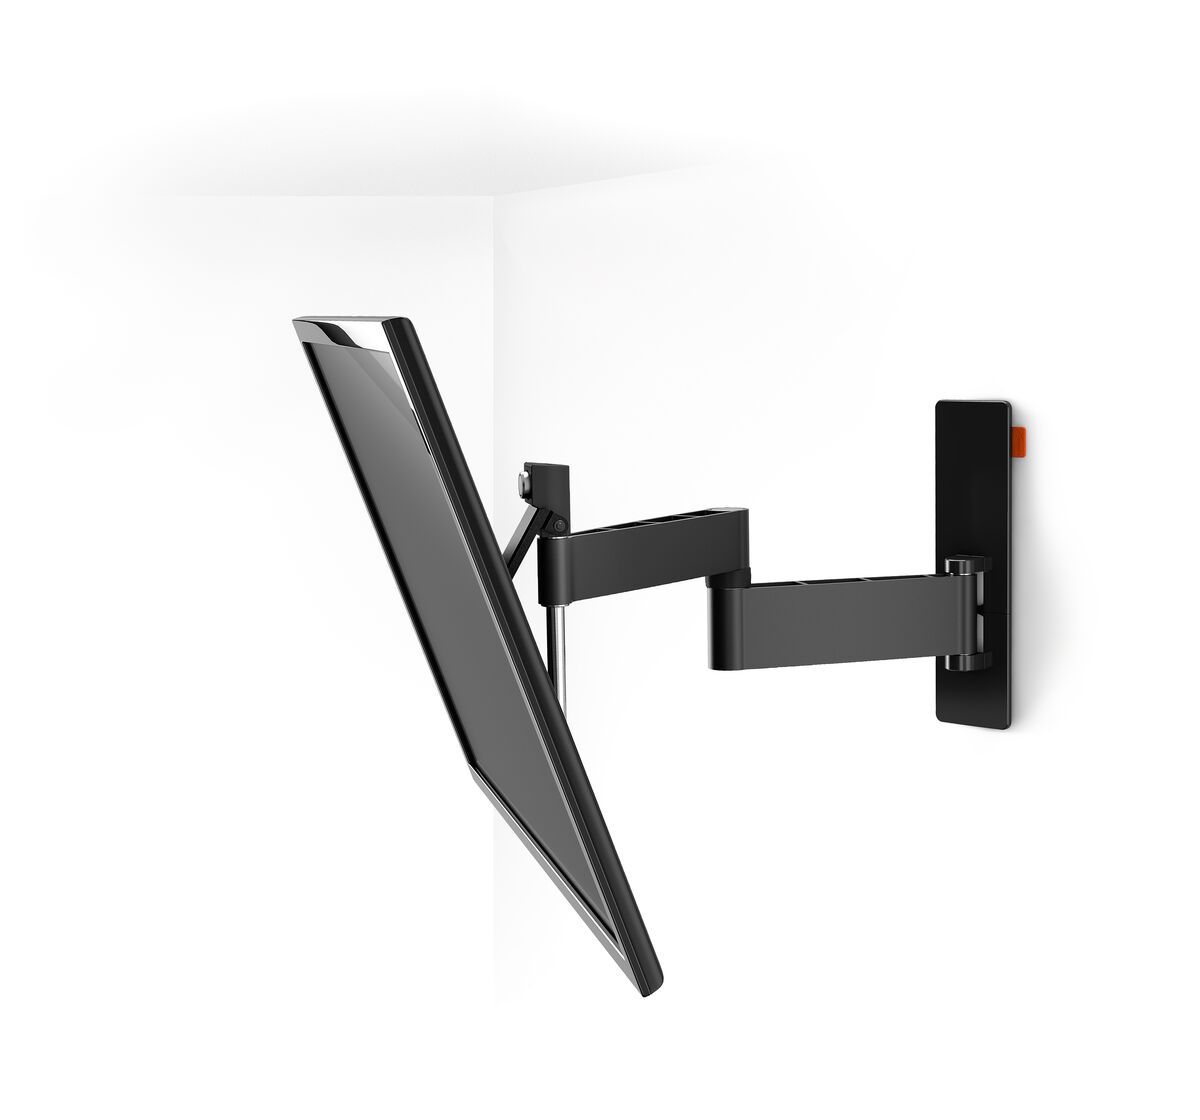 Vogel's W53070 Full-Motion TV Wall Mount (black) - Suitable for 32 up to 55 inch TVs - Full motion (up to 180°) - Tilt up to 20° - White wall